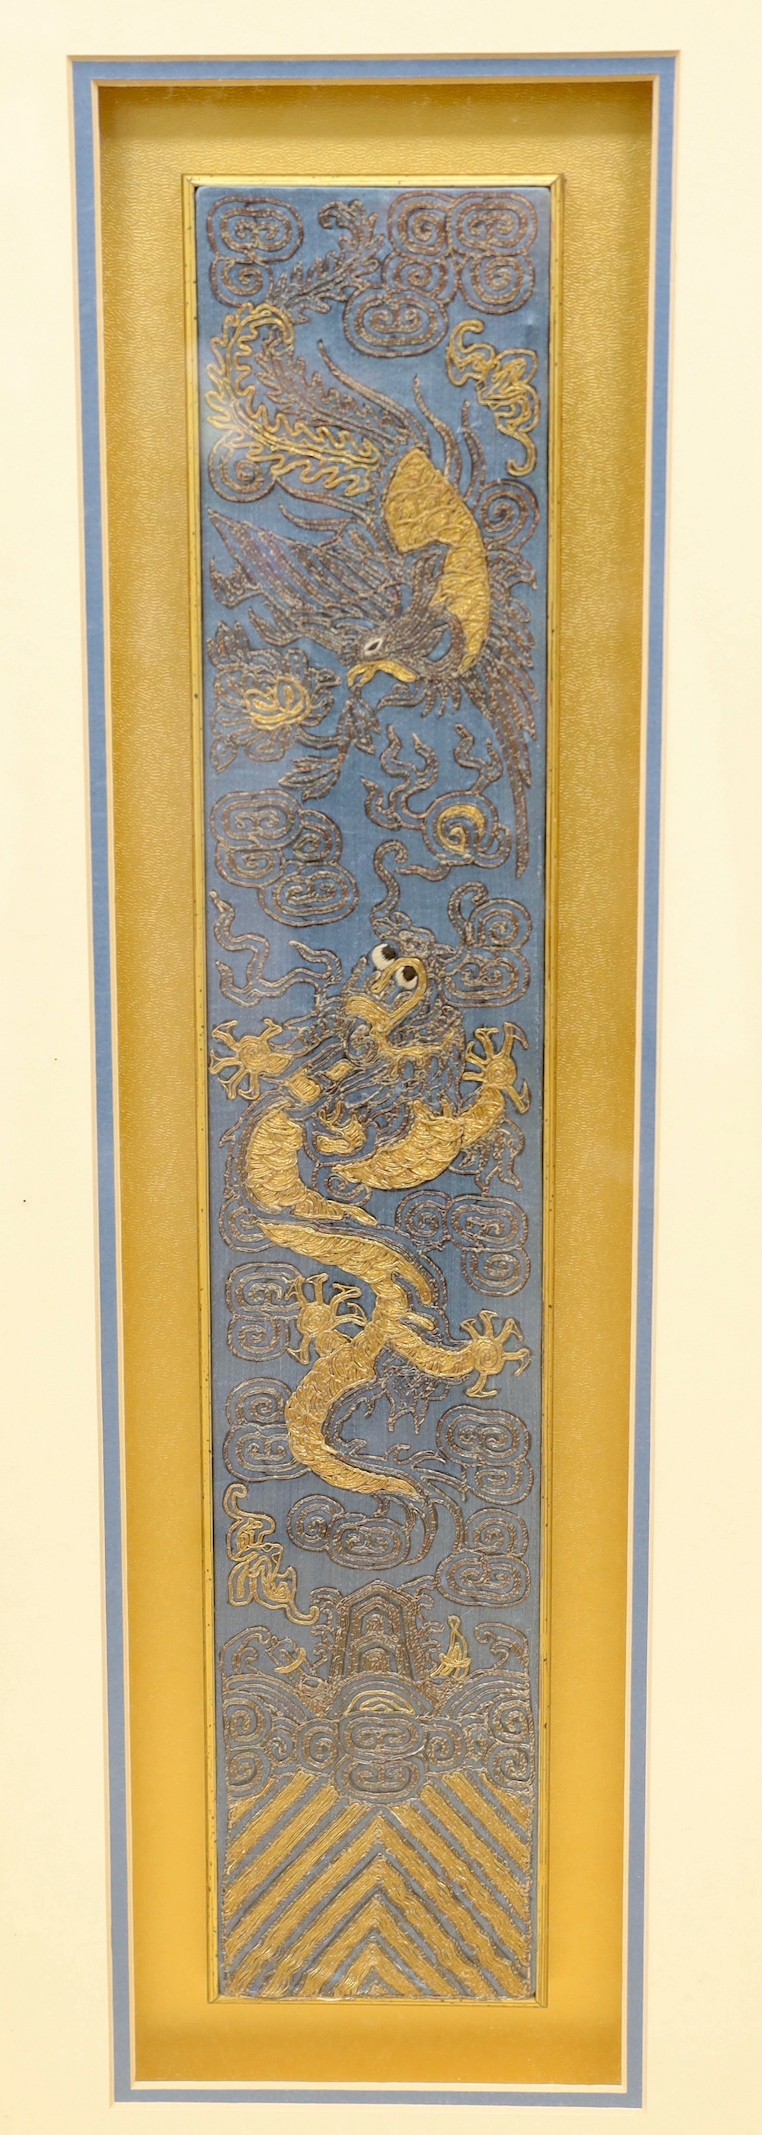 A pair of framed early 20th century Chinese metal thread embroidered ‘dragon’ design sleeve bands, - Image 3 of 4